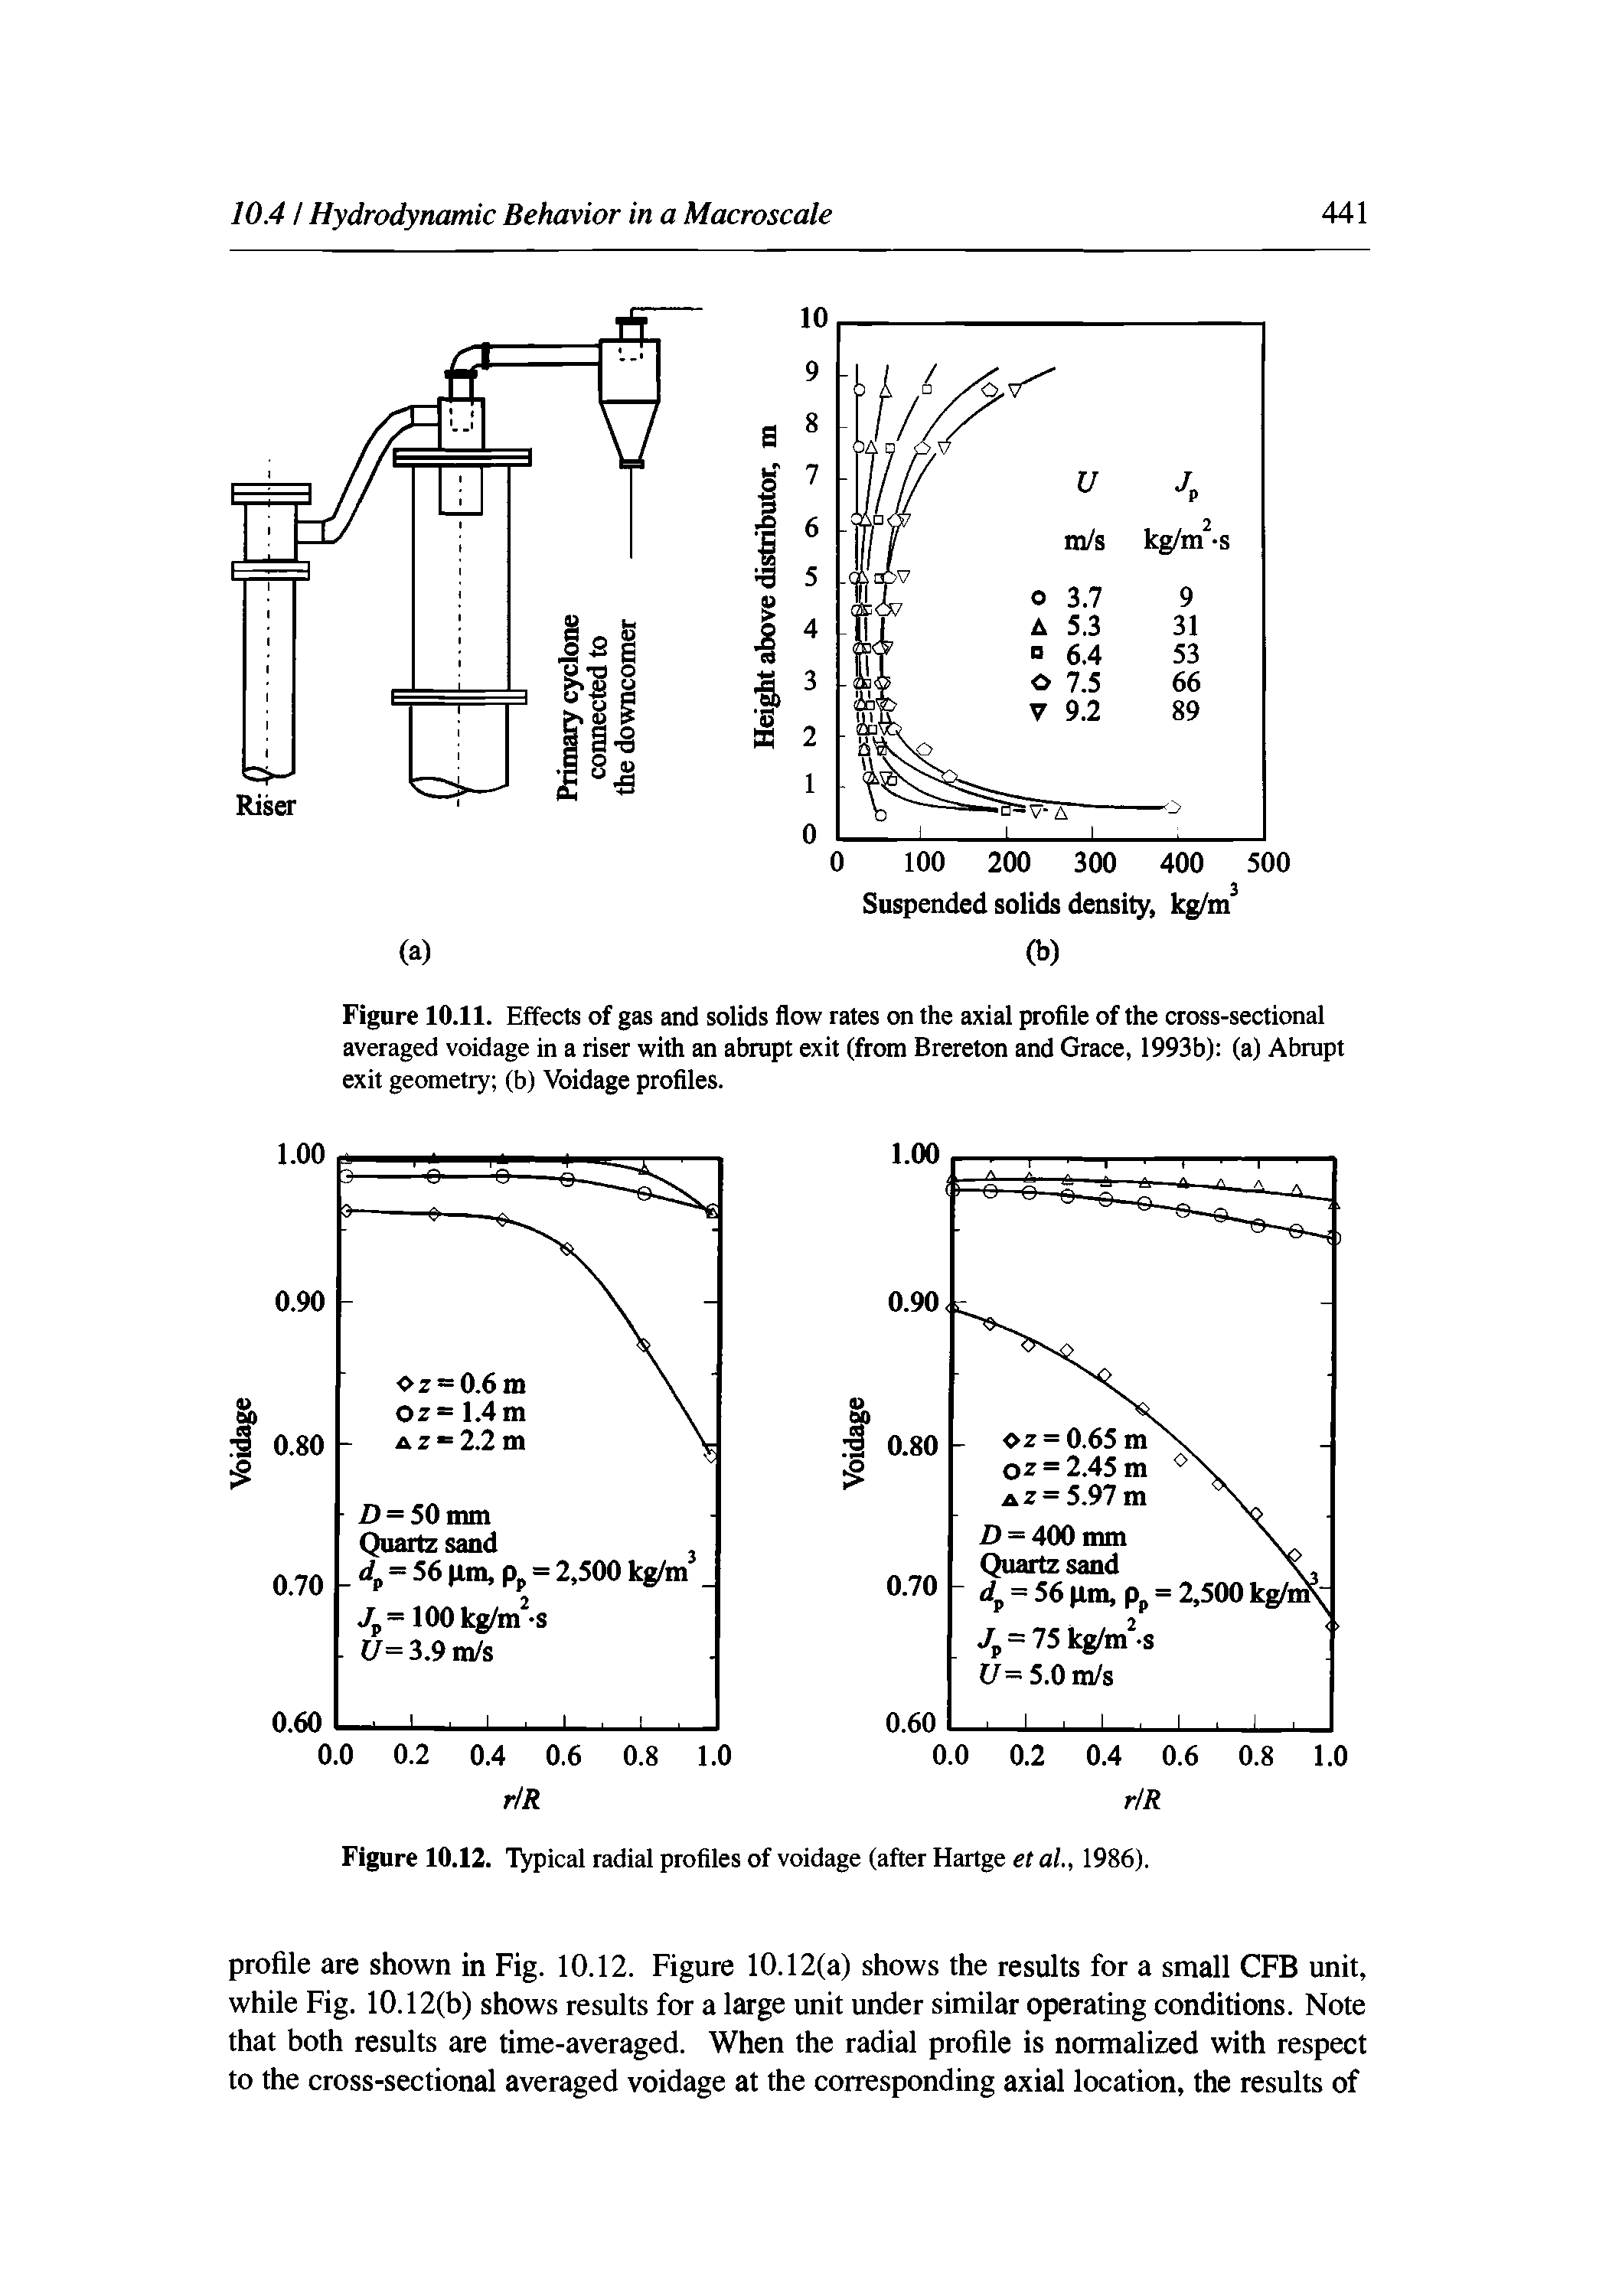 Figure 10.11. Effects of gas and solids flow rates on the axial profile of the cross-sectional averaged voidage in a riser with an abrupt exit (from Brereton and Grace, 1993b) (a) Abrupt exit geometry (b) Voidage profiles.